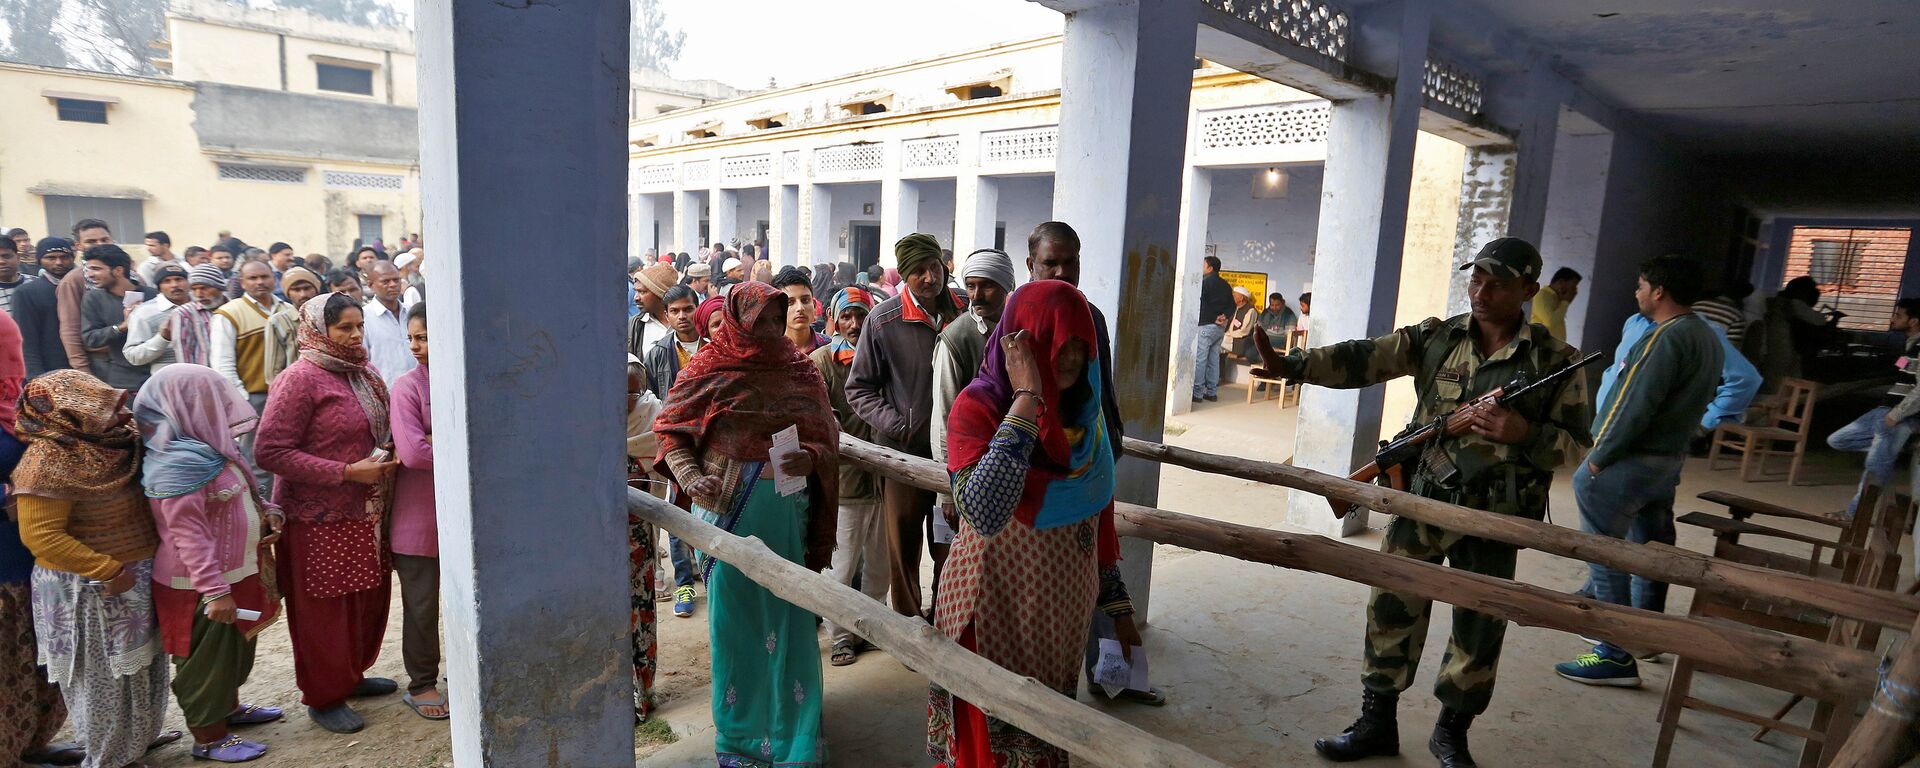 People queue to vote during the state assembly election, in the town of Deoband, in the state of Uttar Pradesh, India, February 15, 2017 - Sputnik International, 1920, 24.12.2021